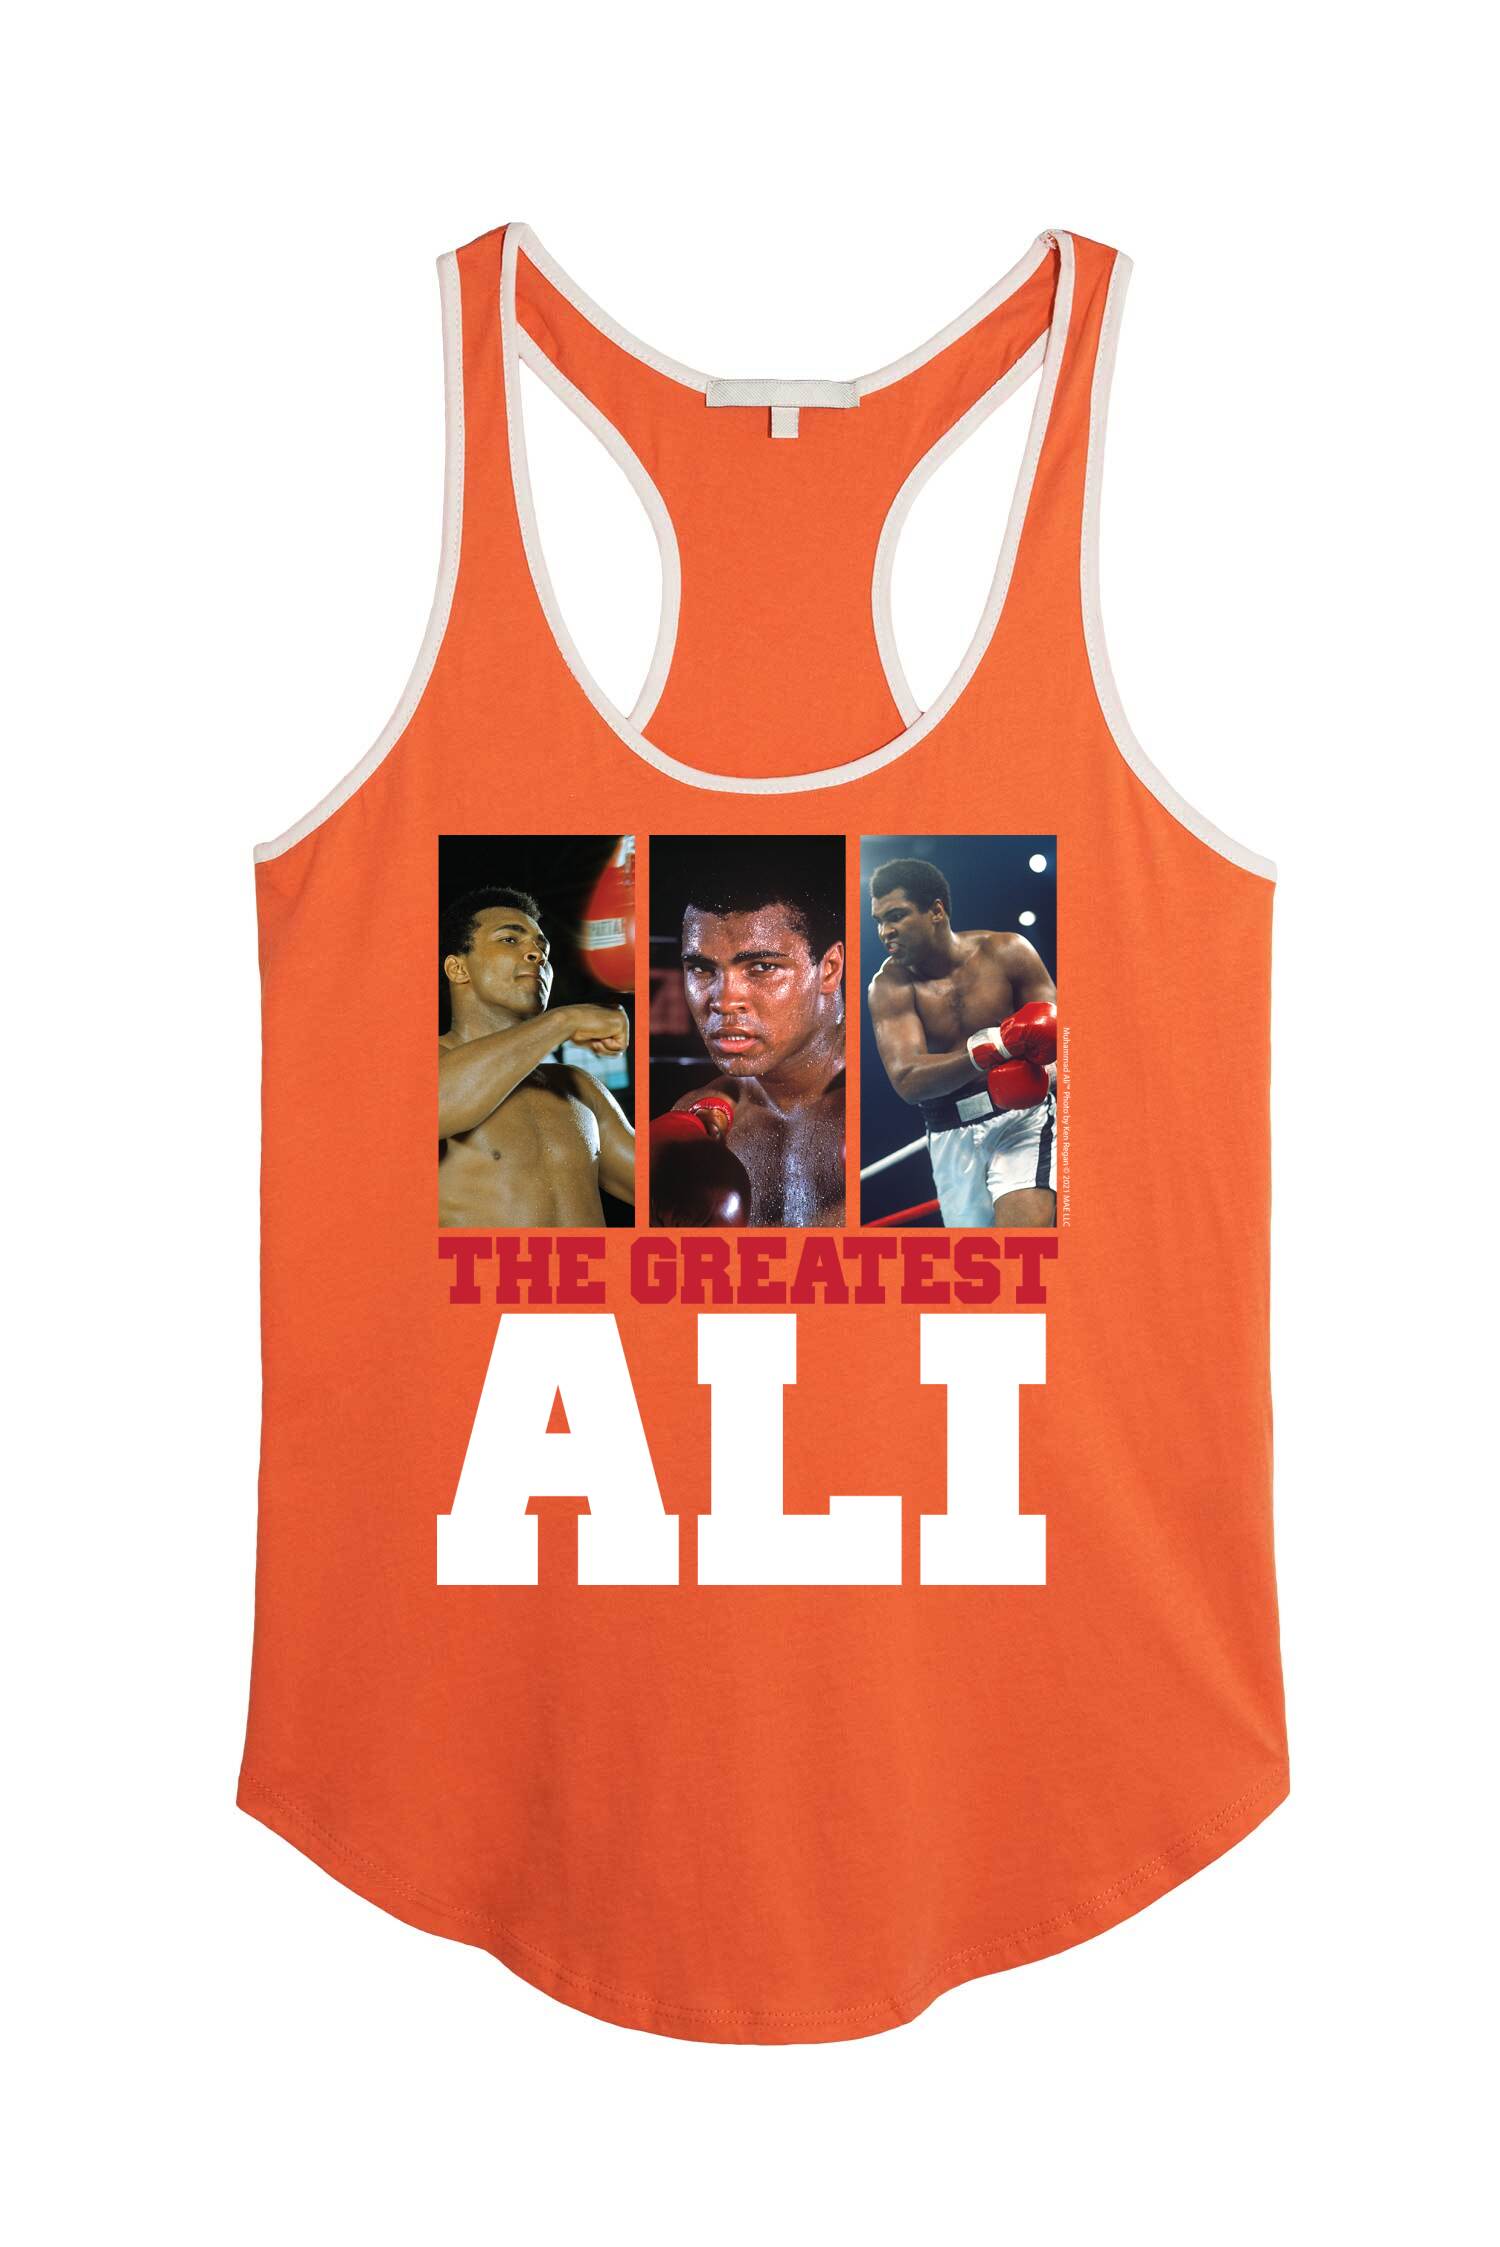 Muhammad Ali - Boxing Legend - Classic In the Ring Photos - Women's ...